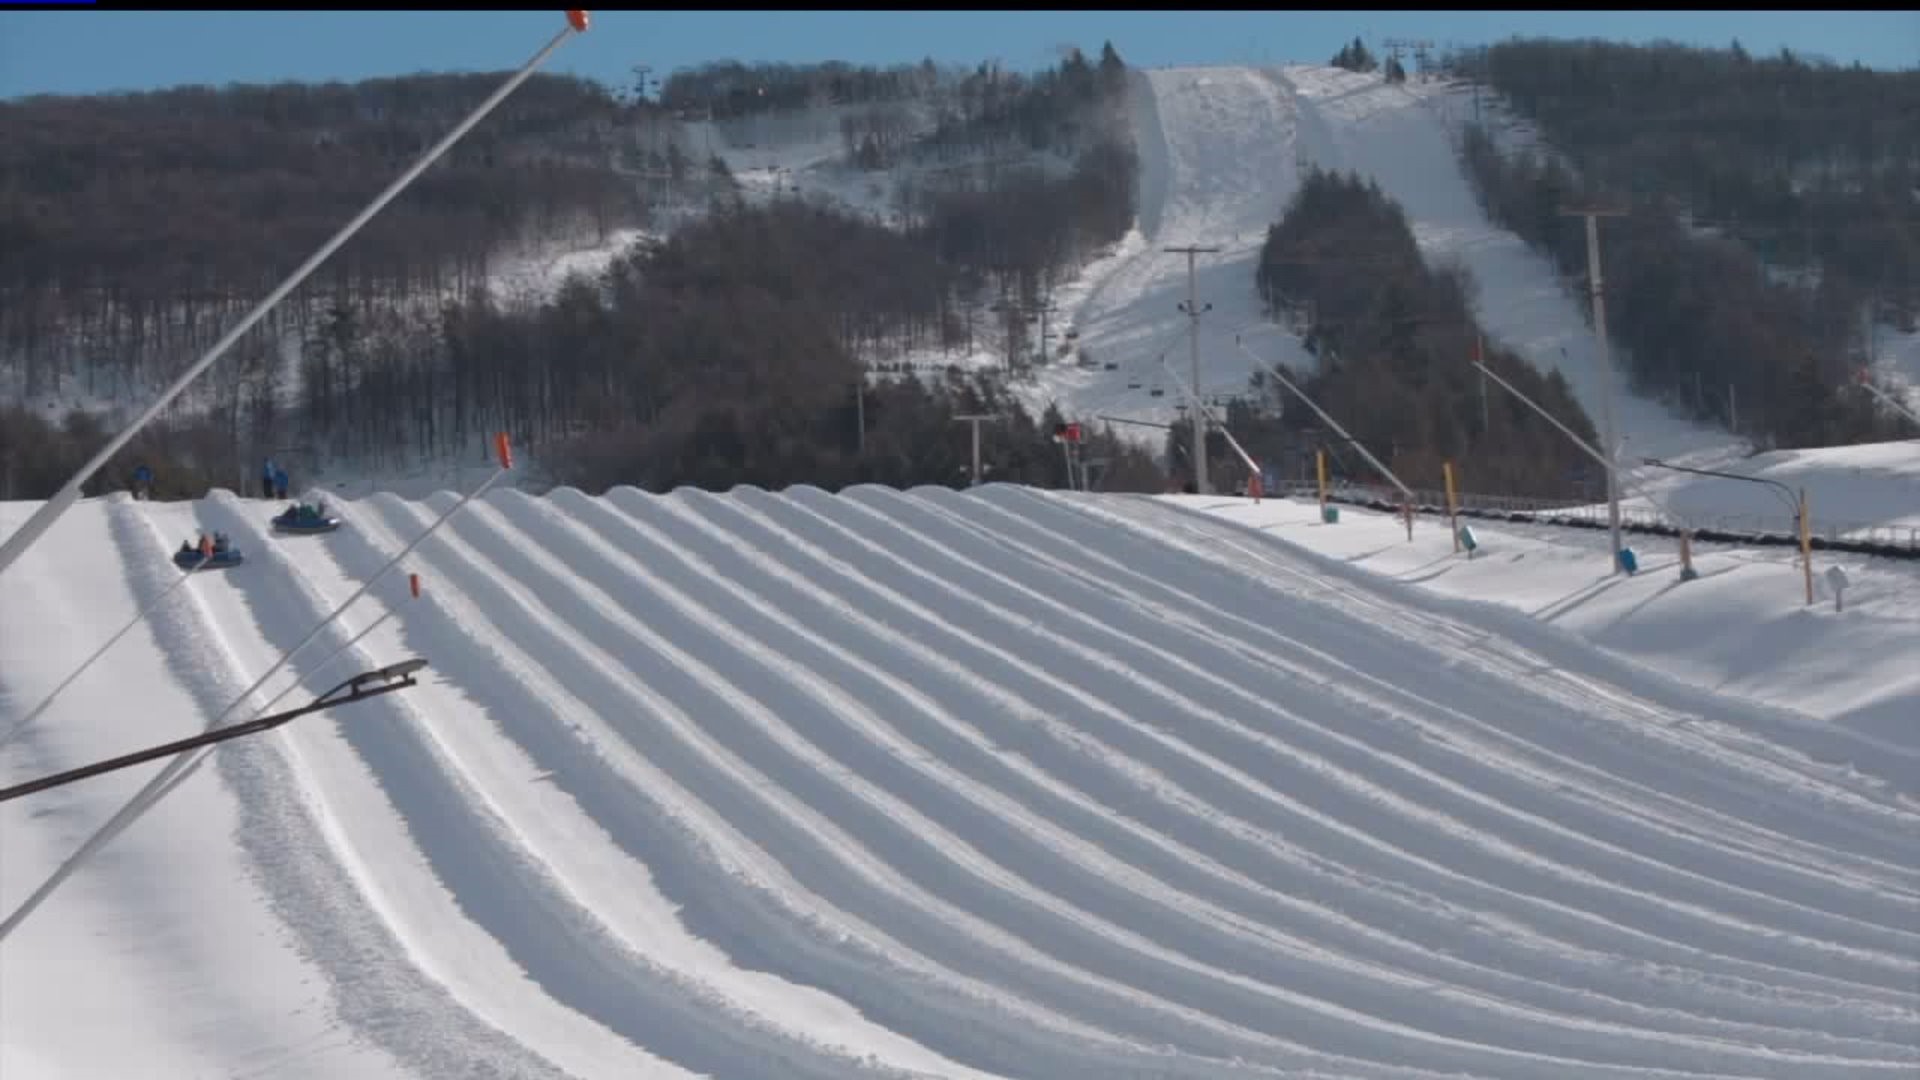 Learning to ski, snow tube at Blue Mountain in the Poconos